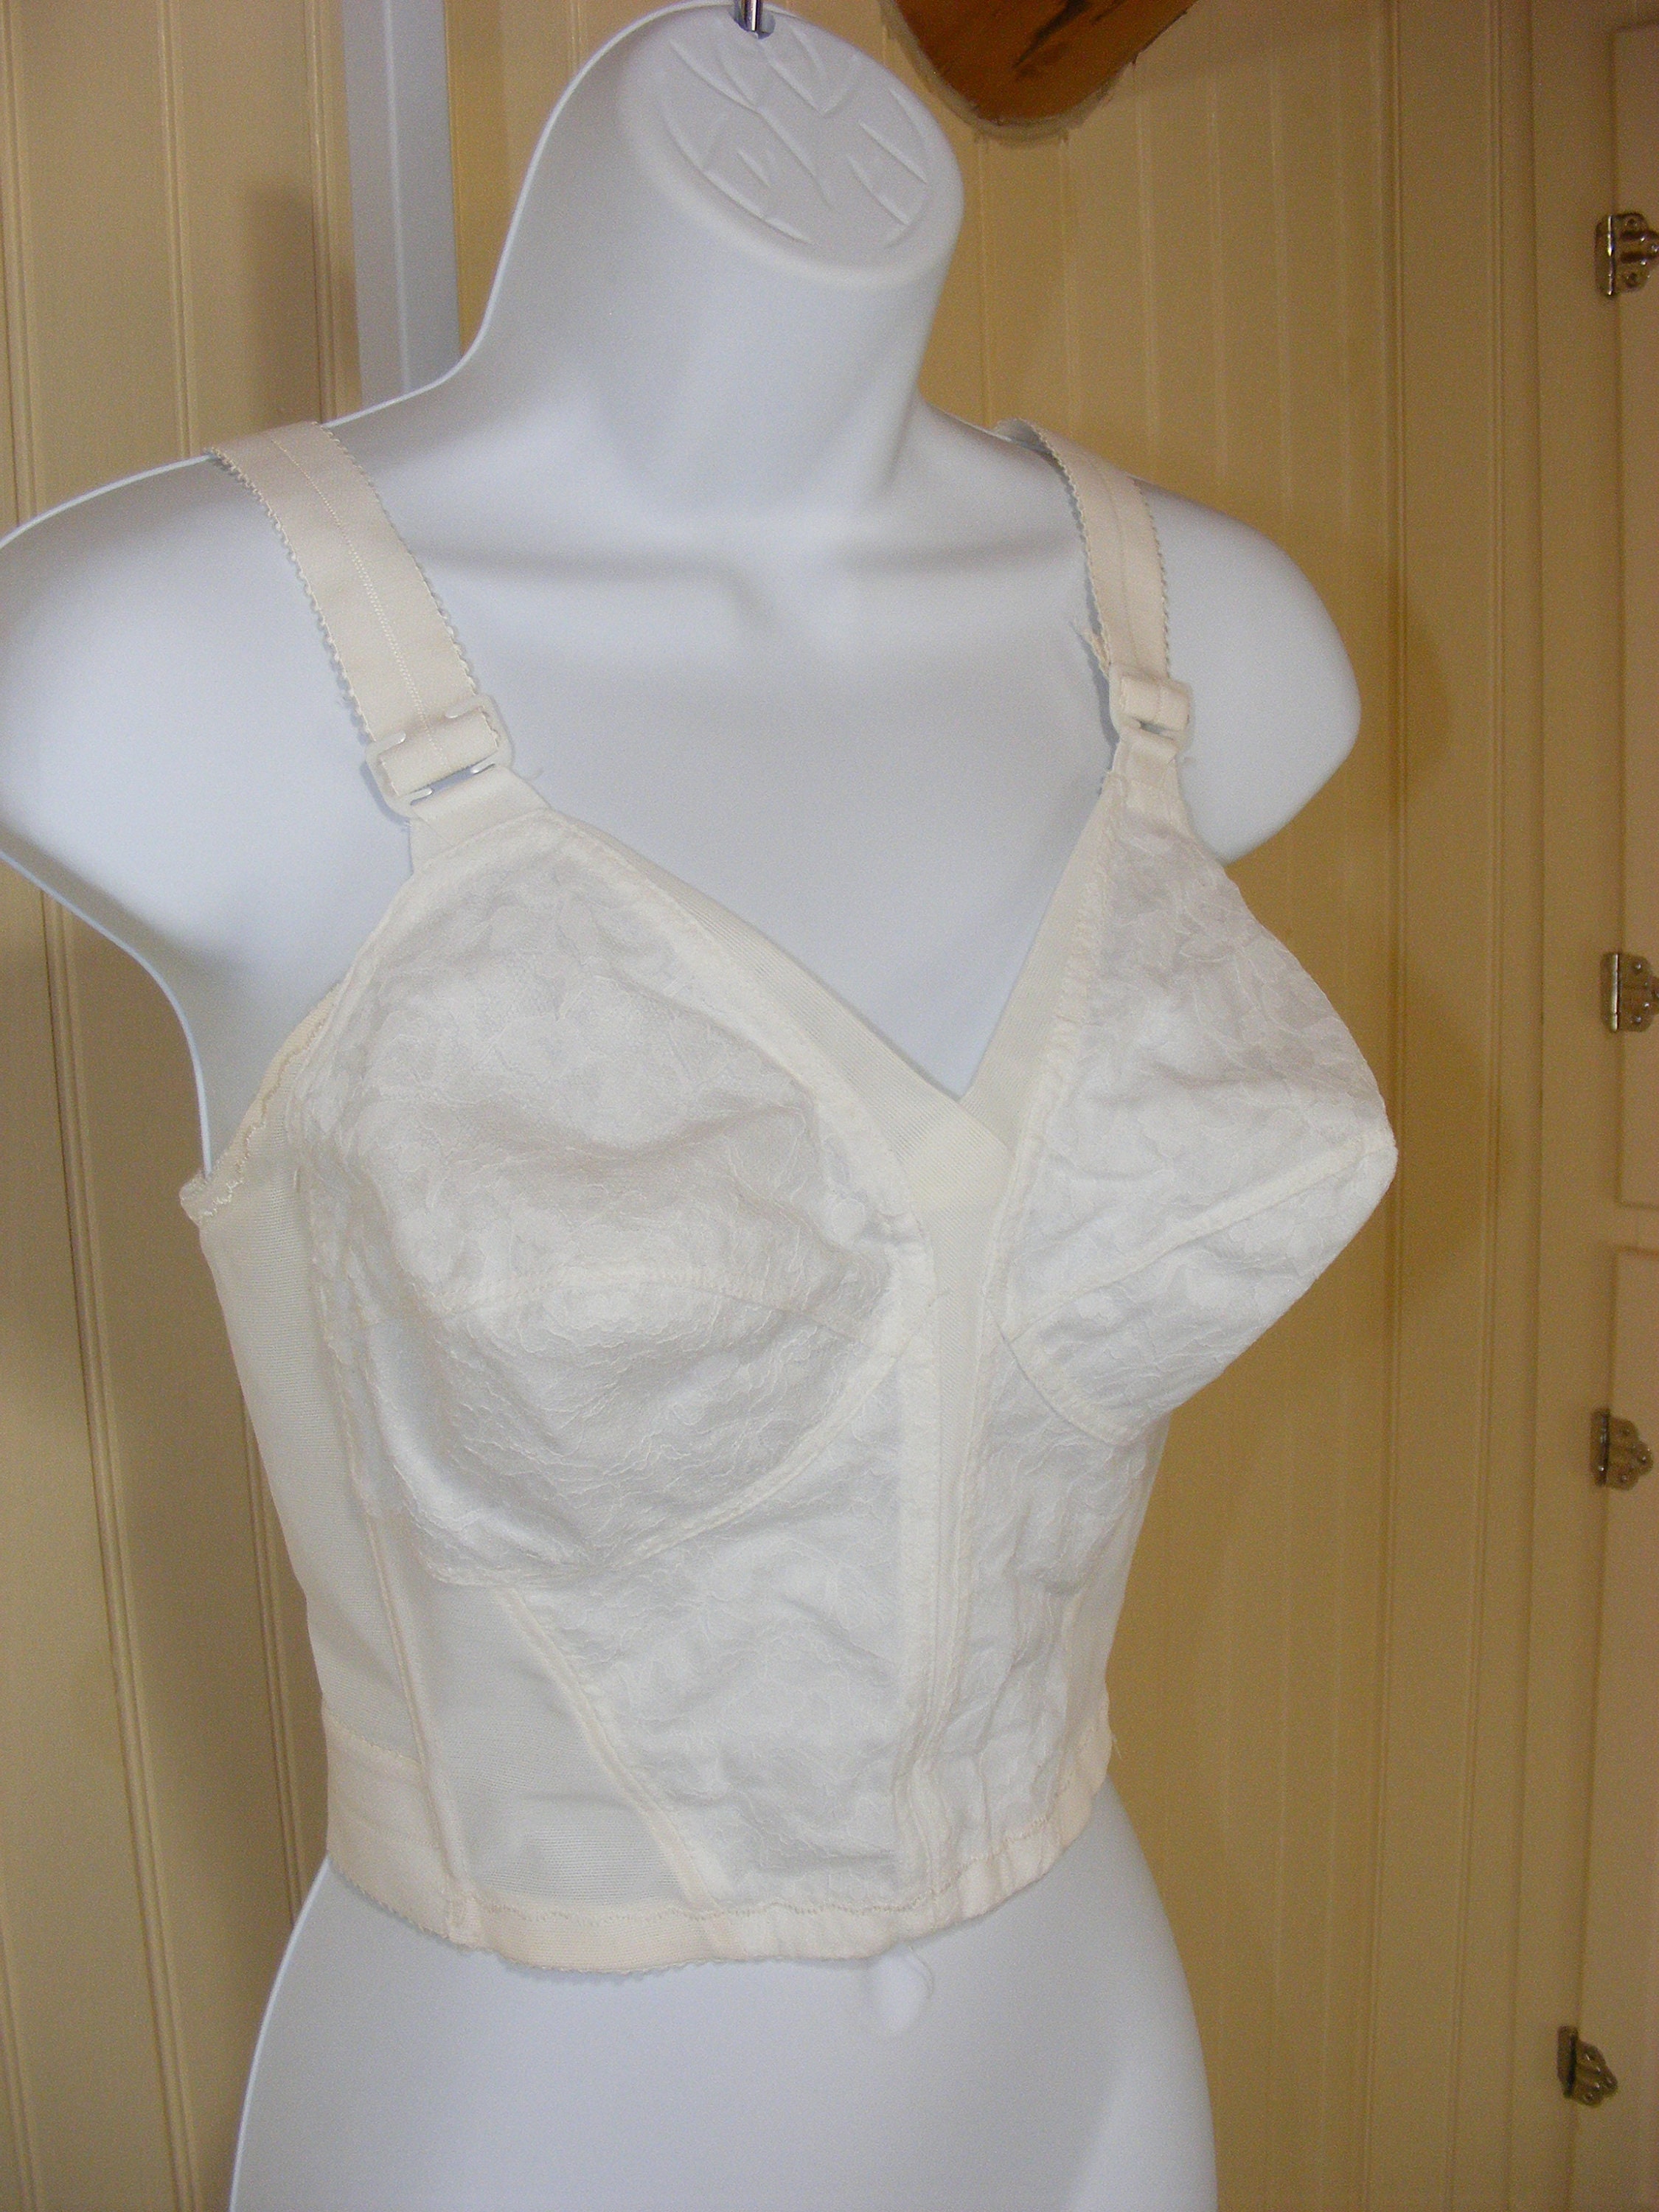 Vintage De Luxe Founsations Front Close Full Support Wire Free Long Line  Bra Snow White 44D 